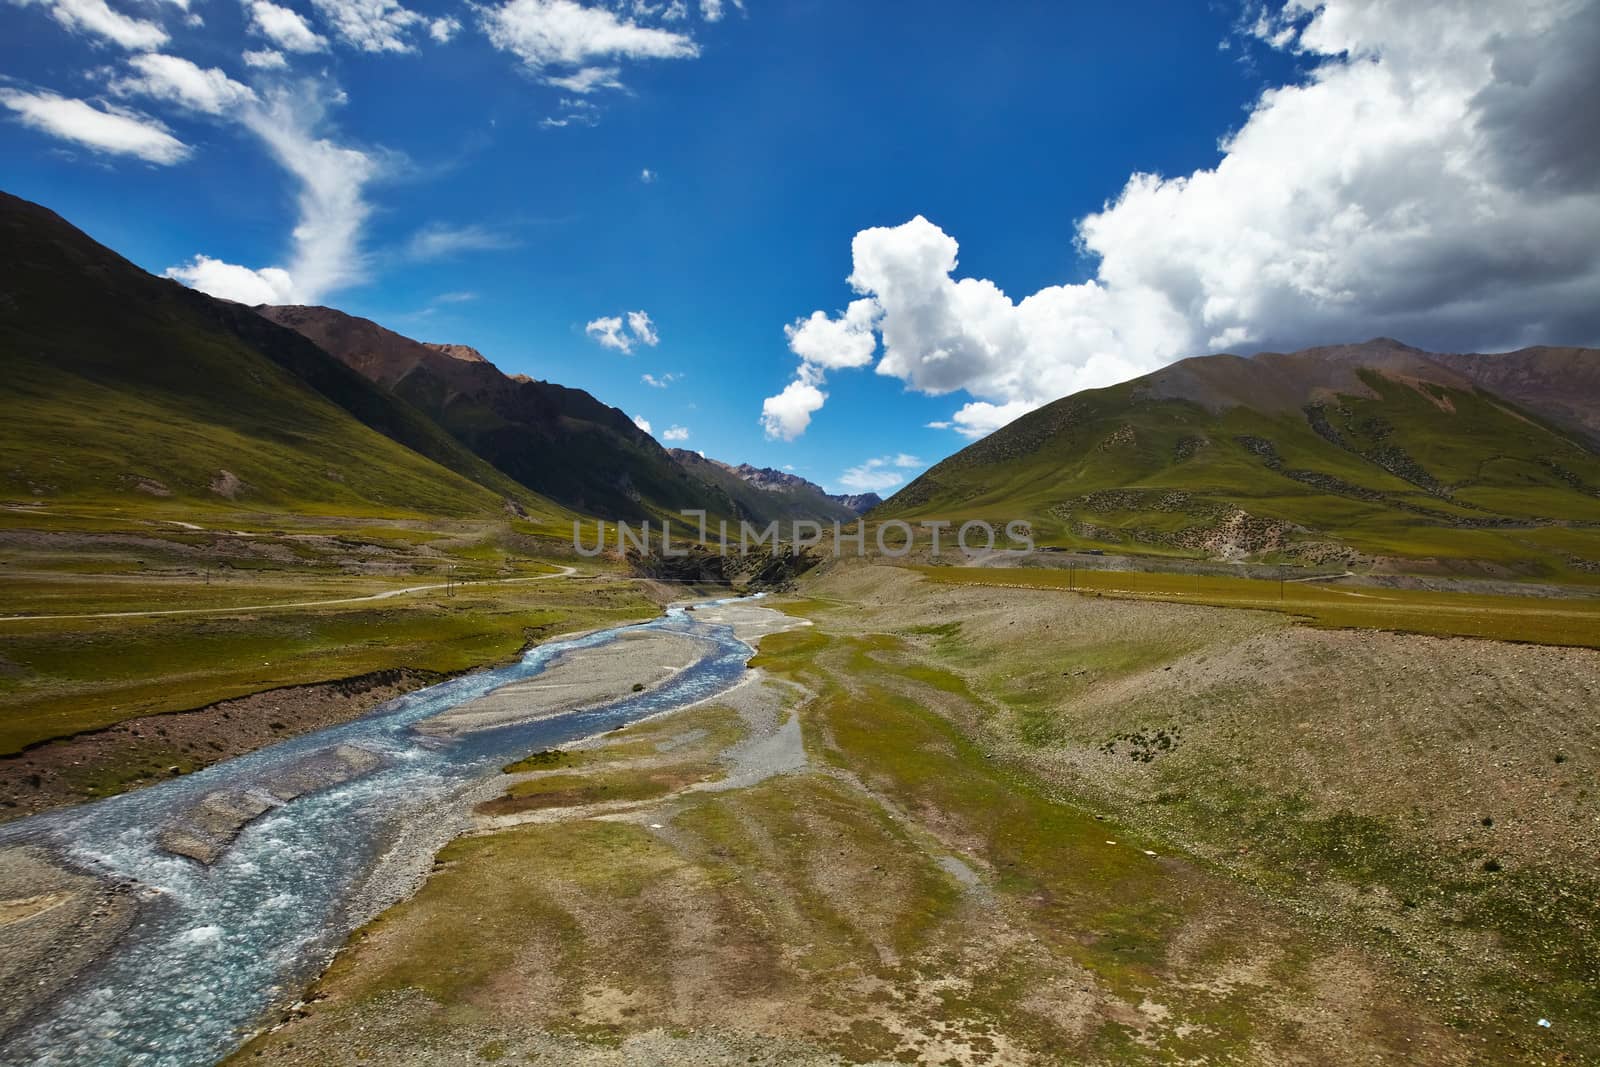 A river cross a plains in Tibetan Plateau, with mountain landscape and cloudy sky